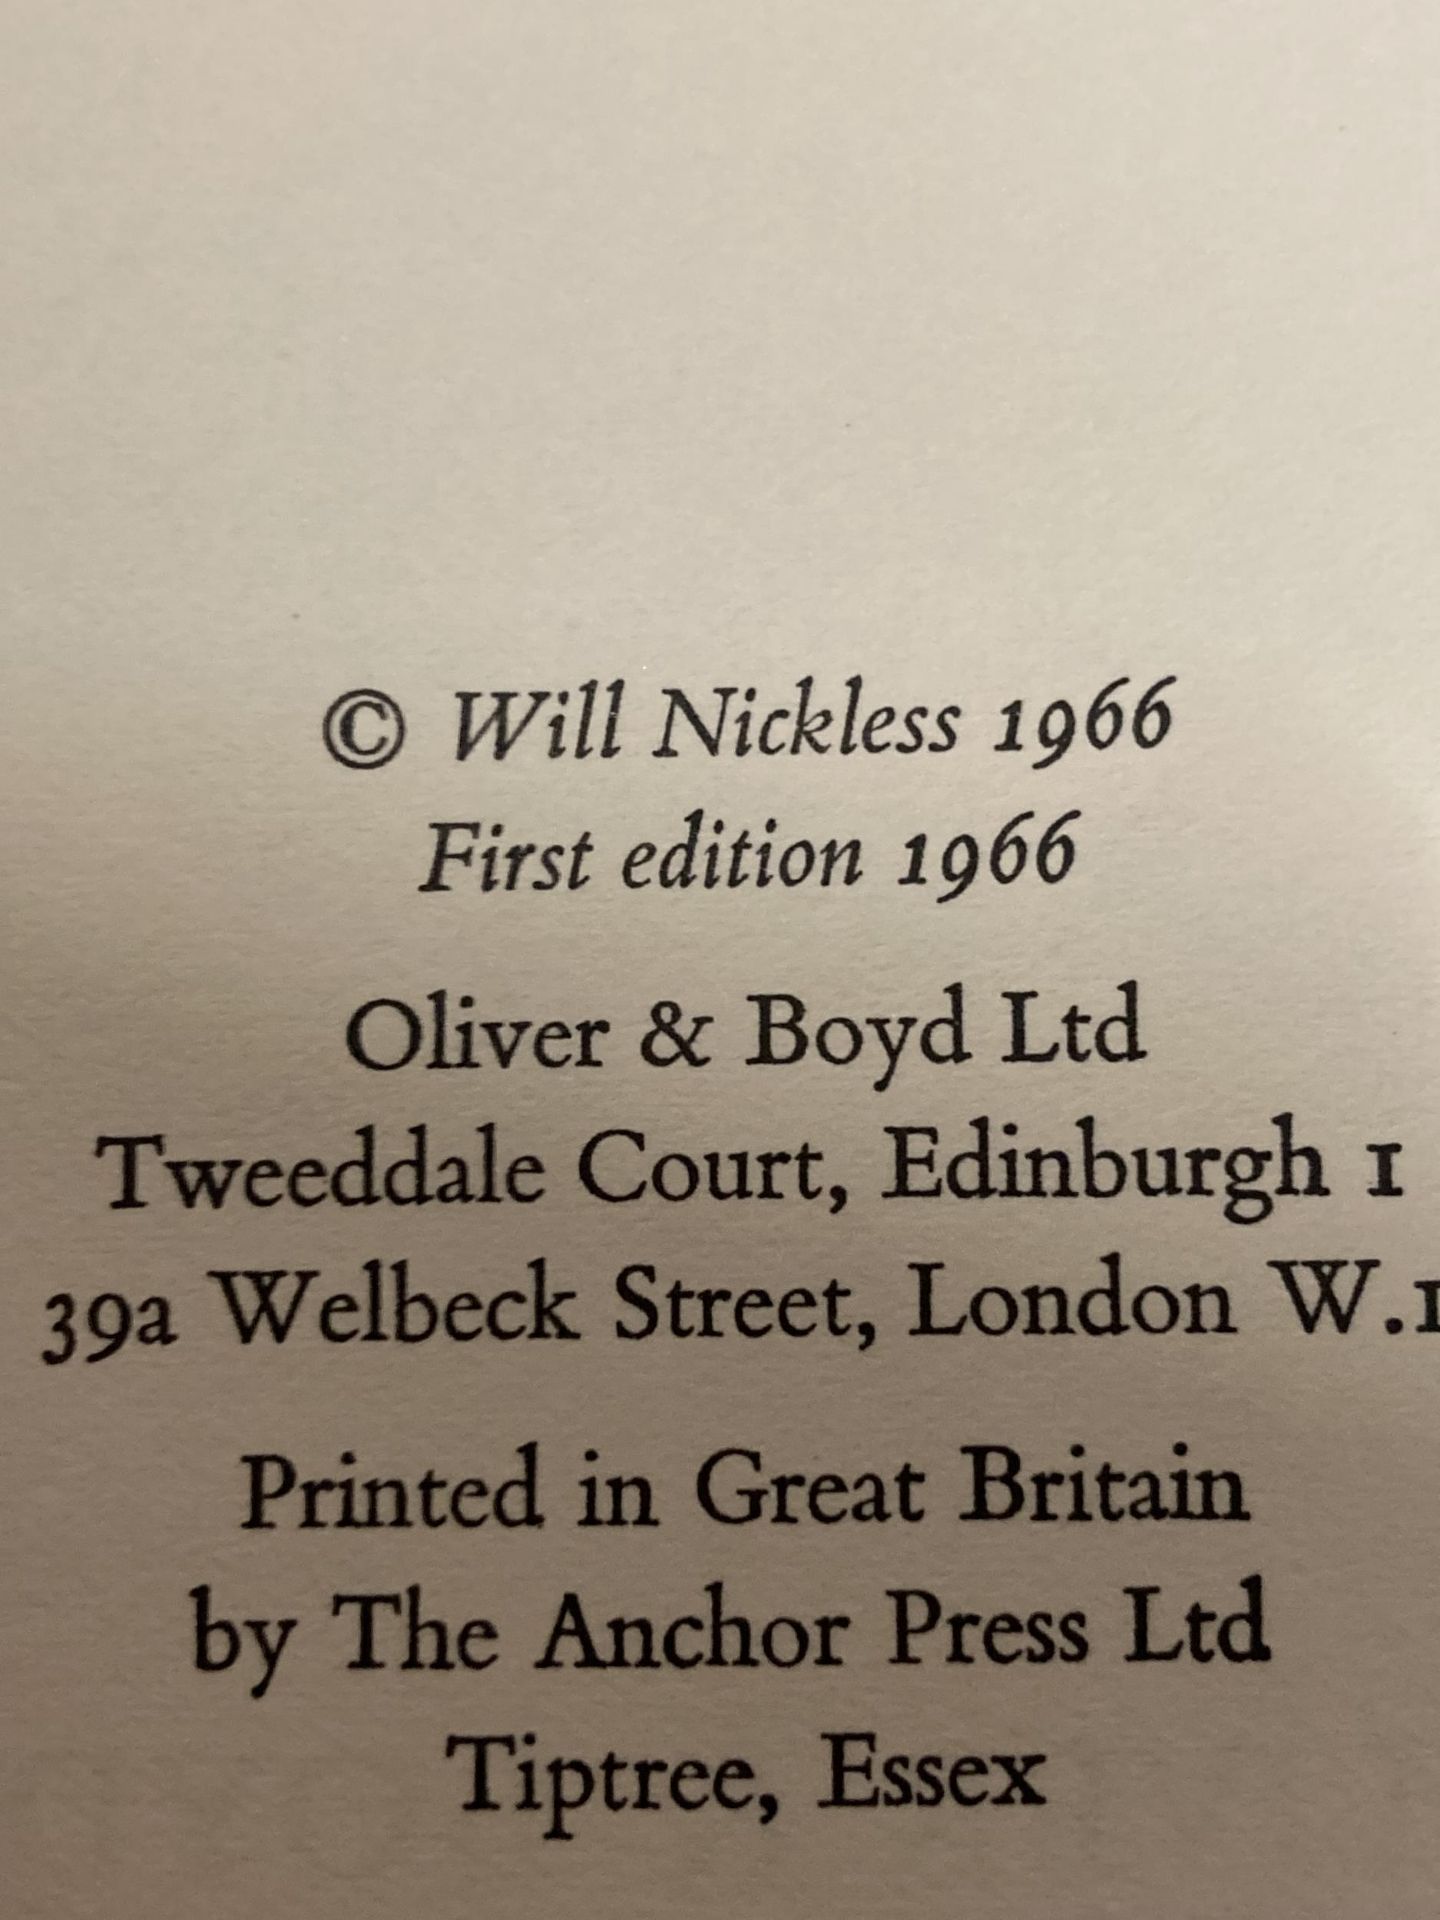 WILL NICKLESS, THE NITEHOOD, 1966, 1ST EDITION BOOK - Image 2 of 2